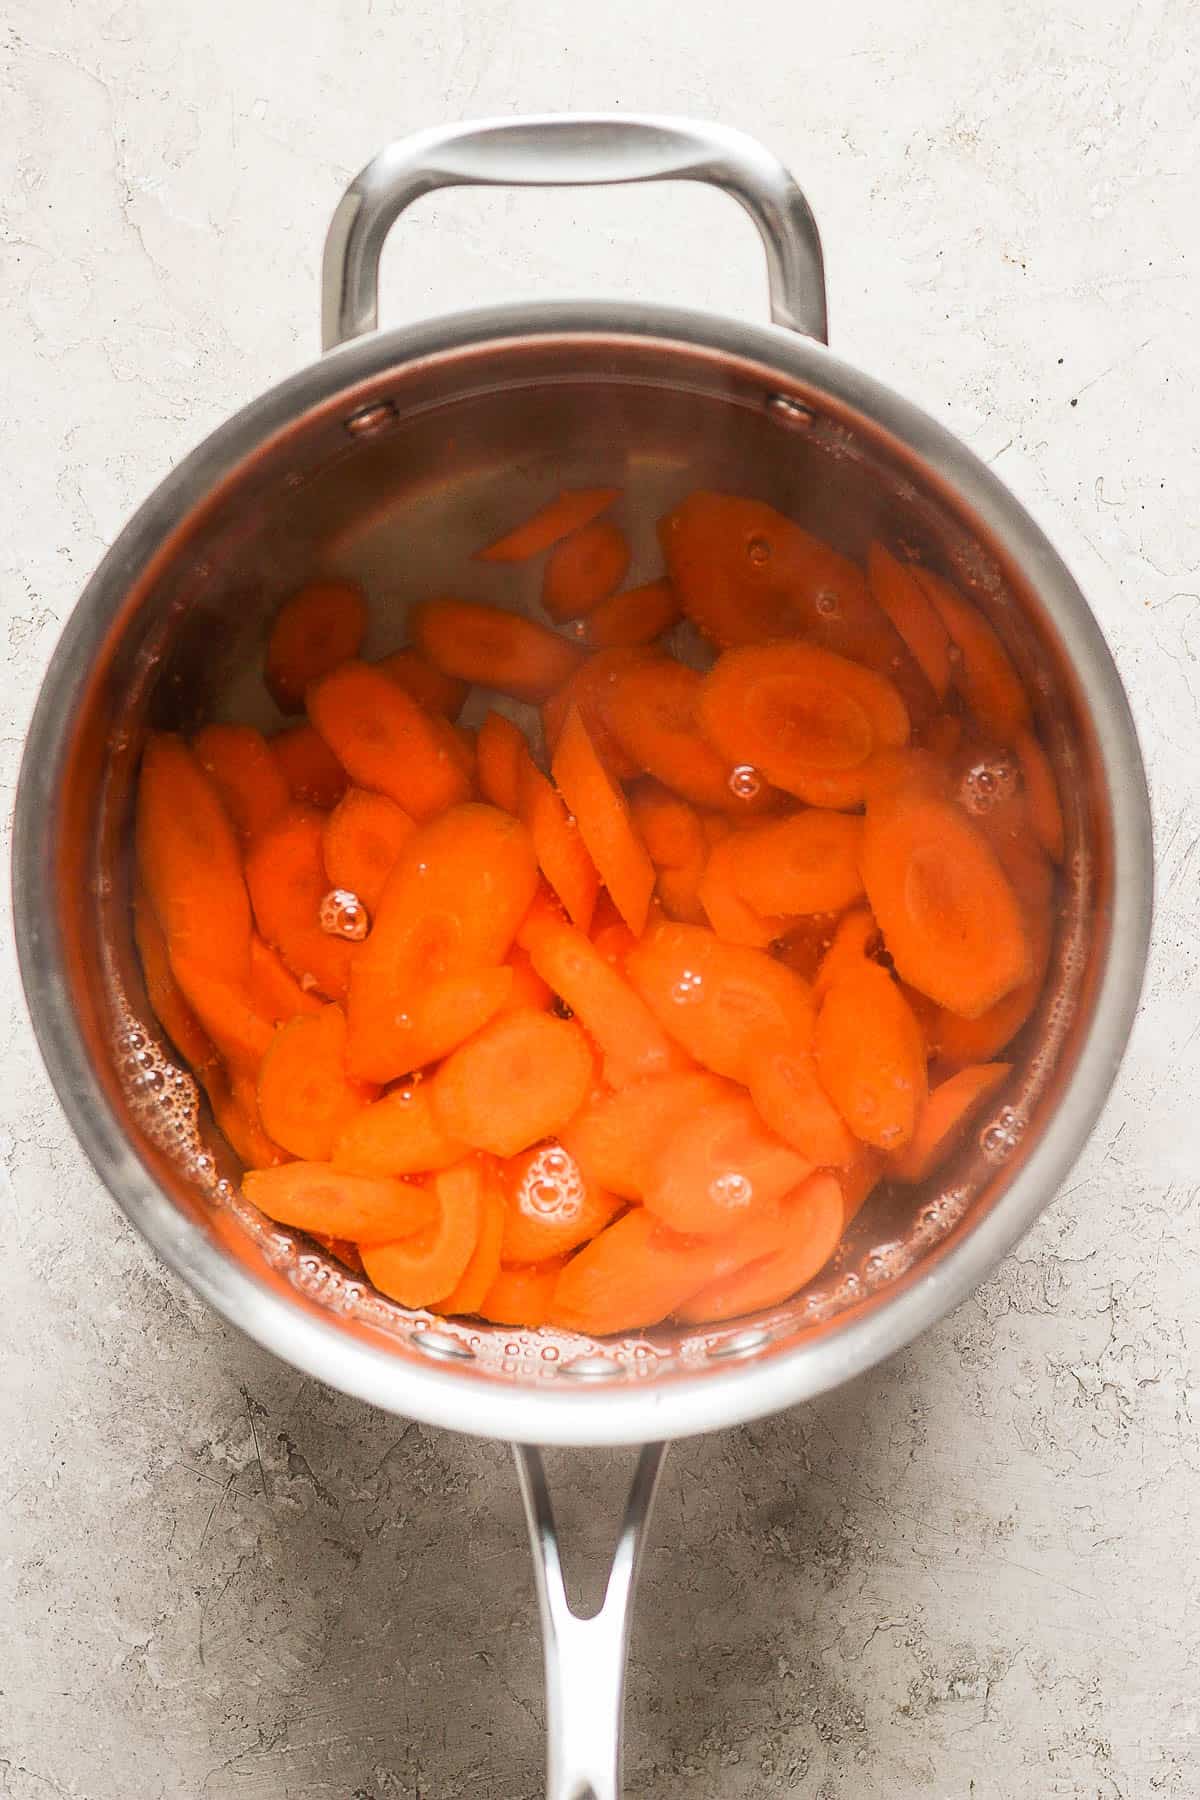 Carrot coins in a saucepan of boiling water.